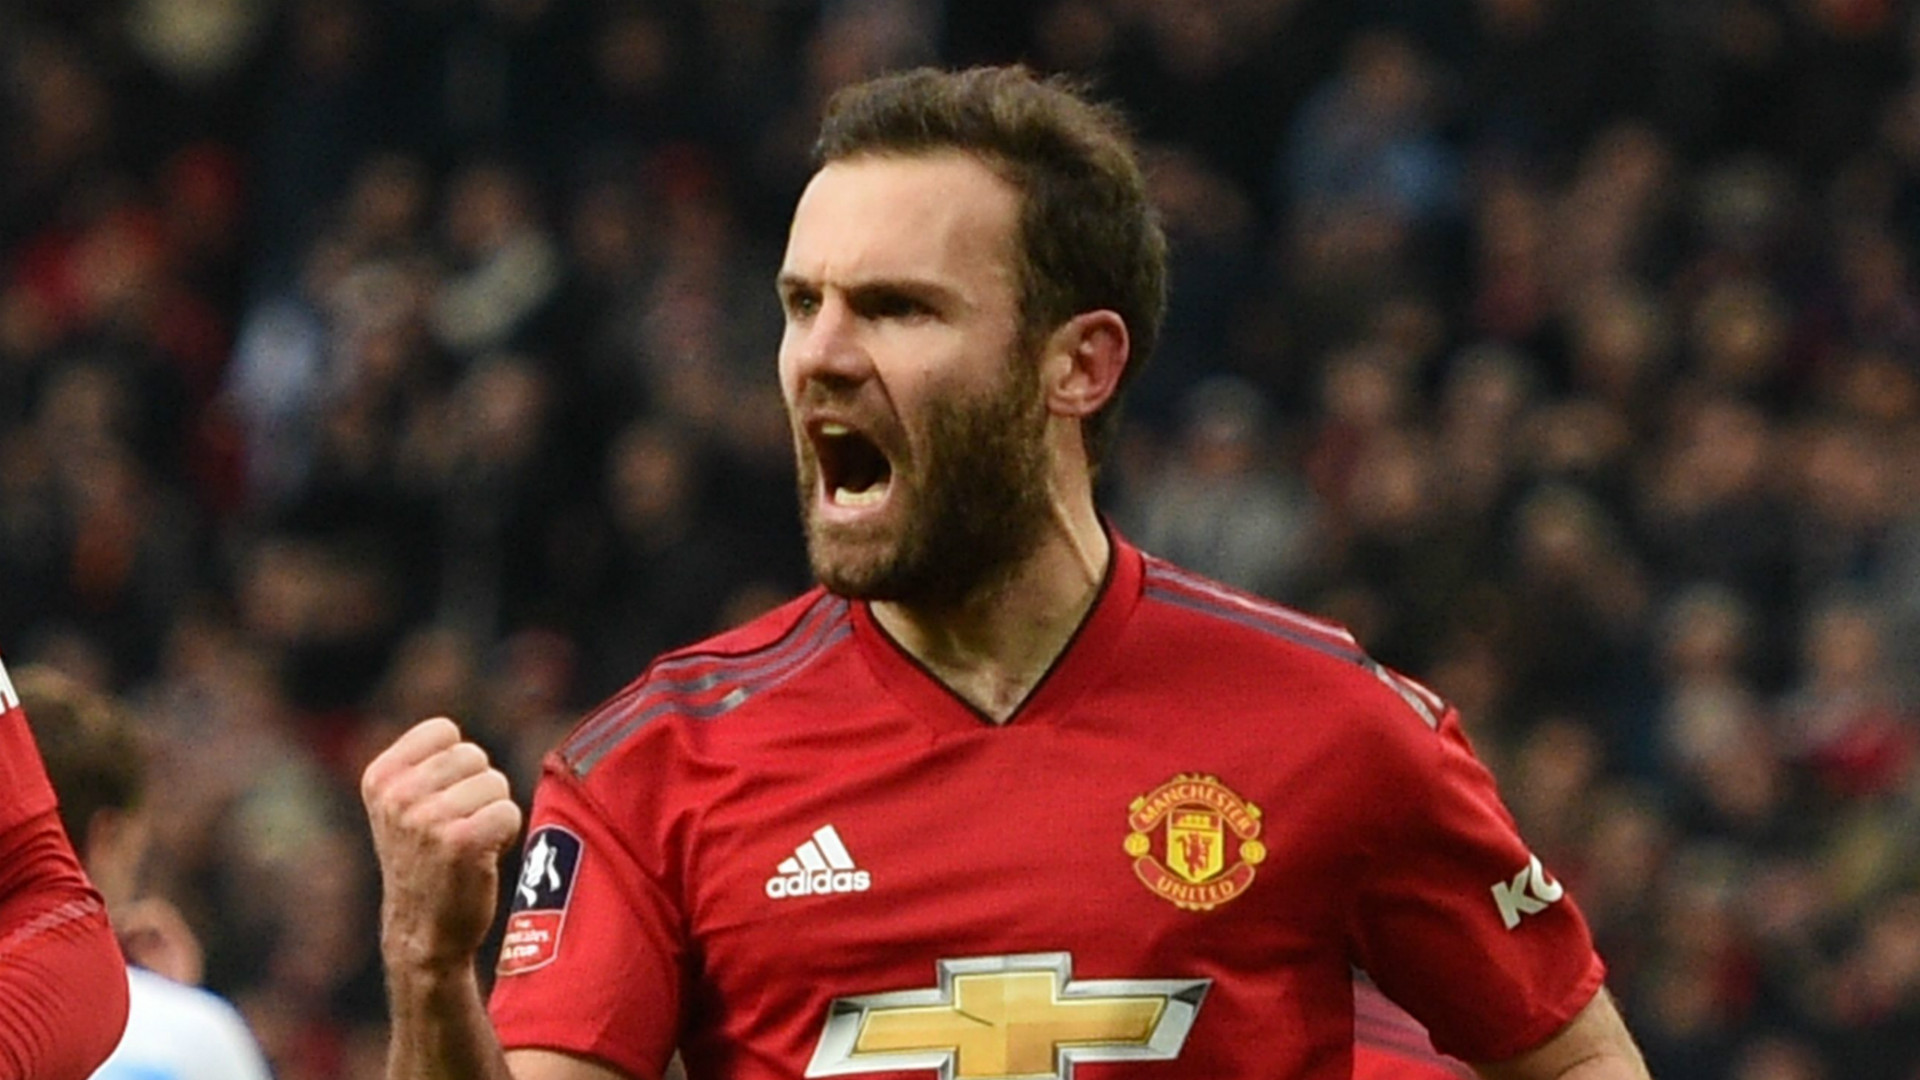 Juan Mata contract World Cup winner in 'top shape' as he plays for